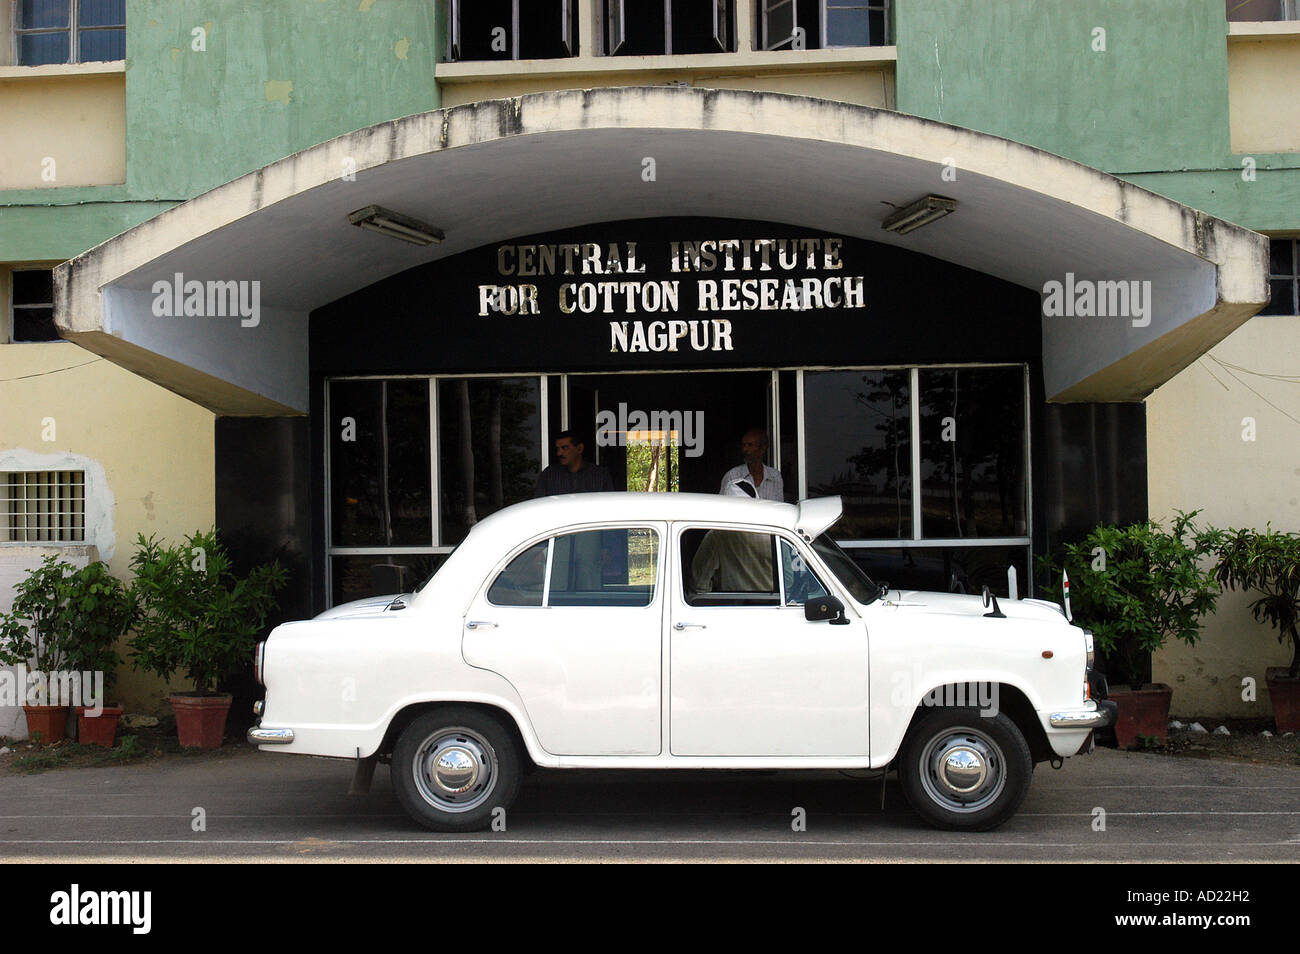 ASB73162 A white Ambassador car parked at Central Institute for cotton Research building at Nagpur Maharashtra India Stock Photo